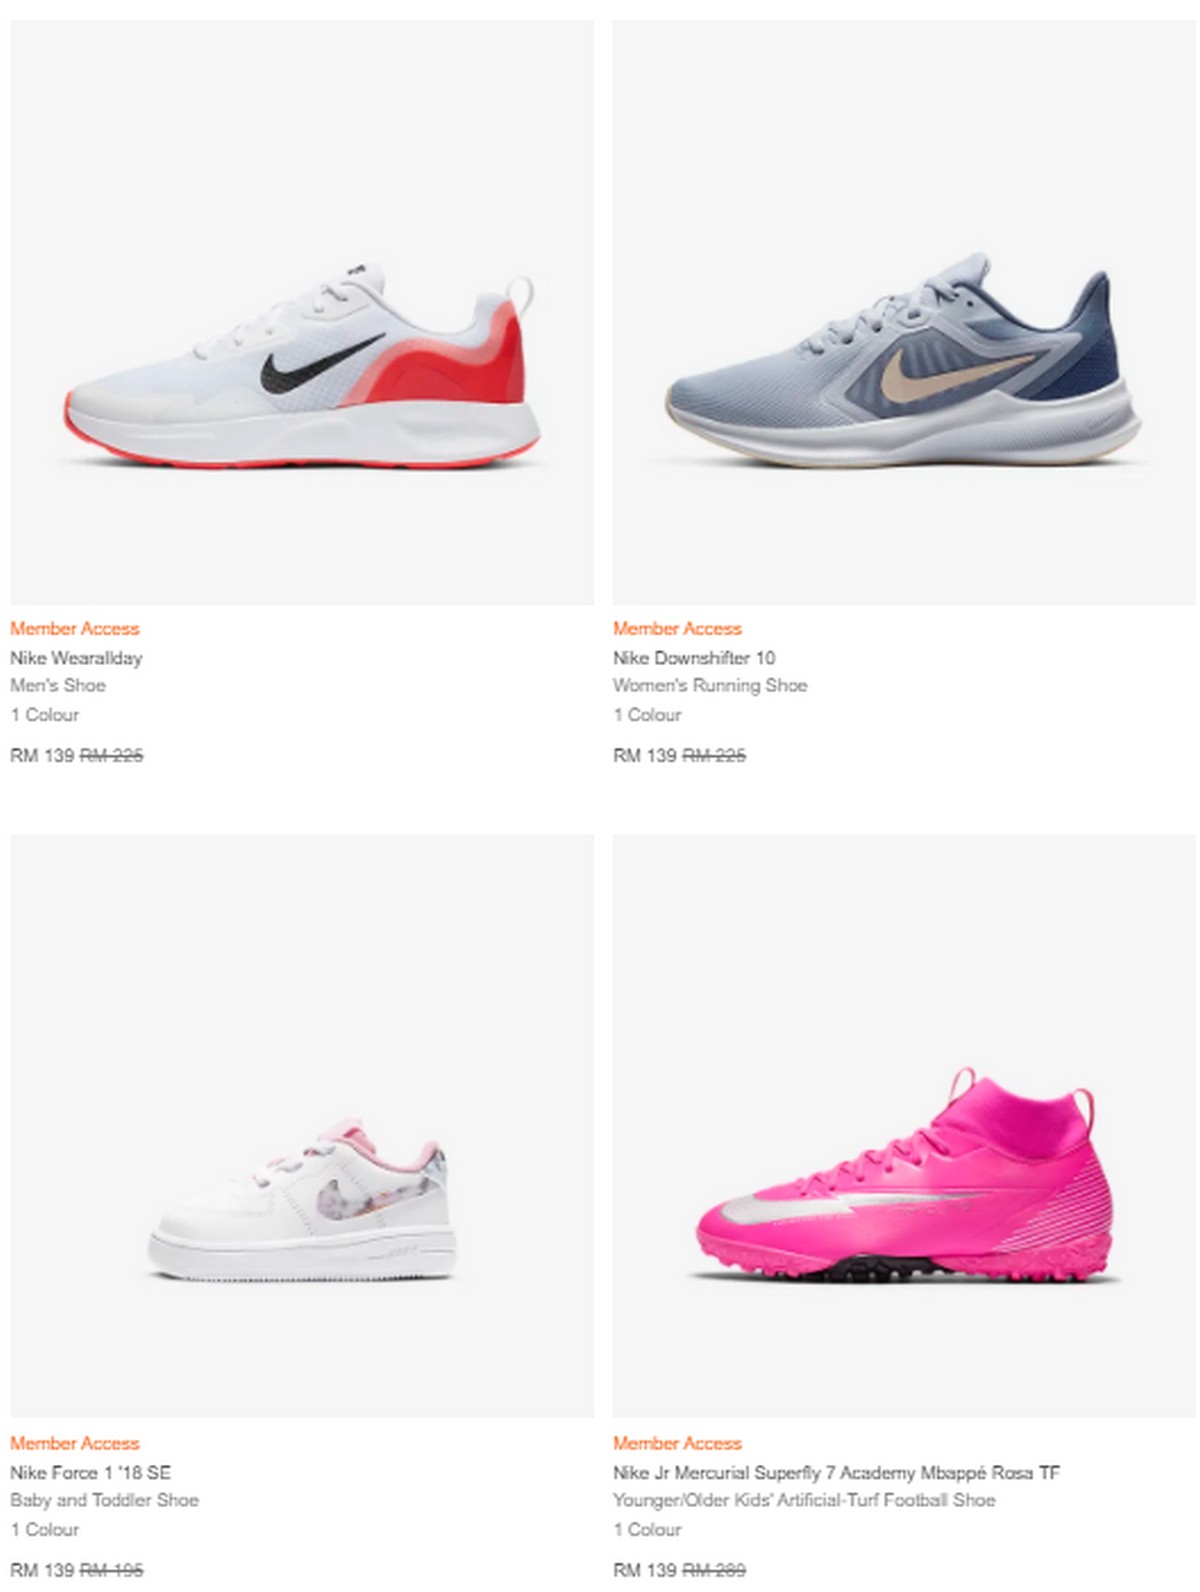 nike-11-11-preview-offer-new-1 - LifeStyle 